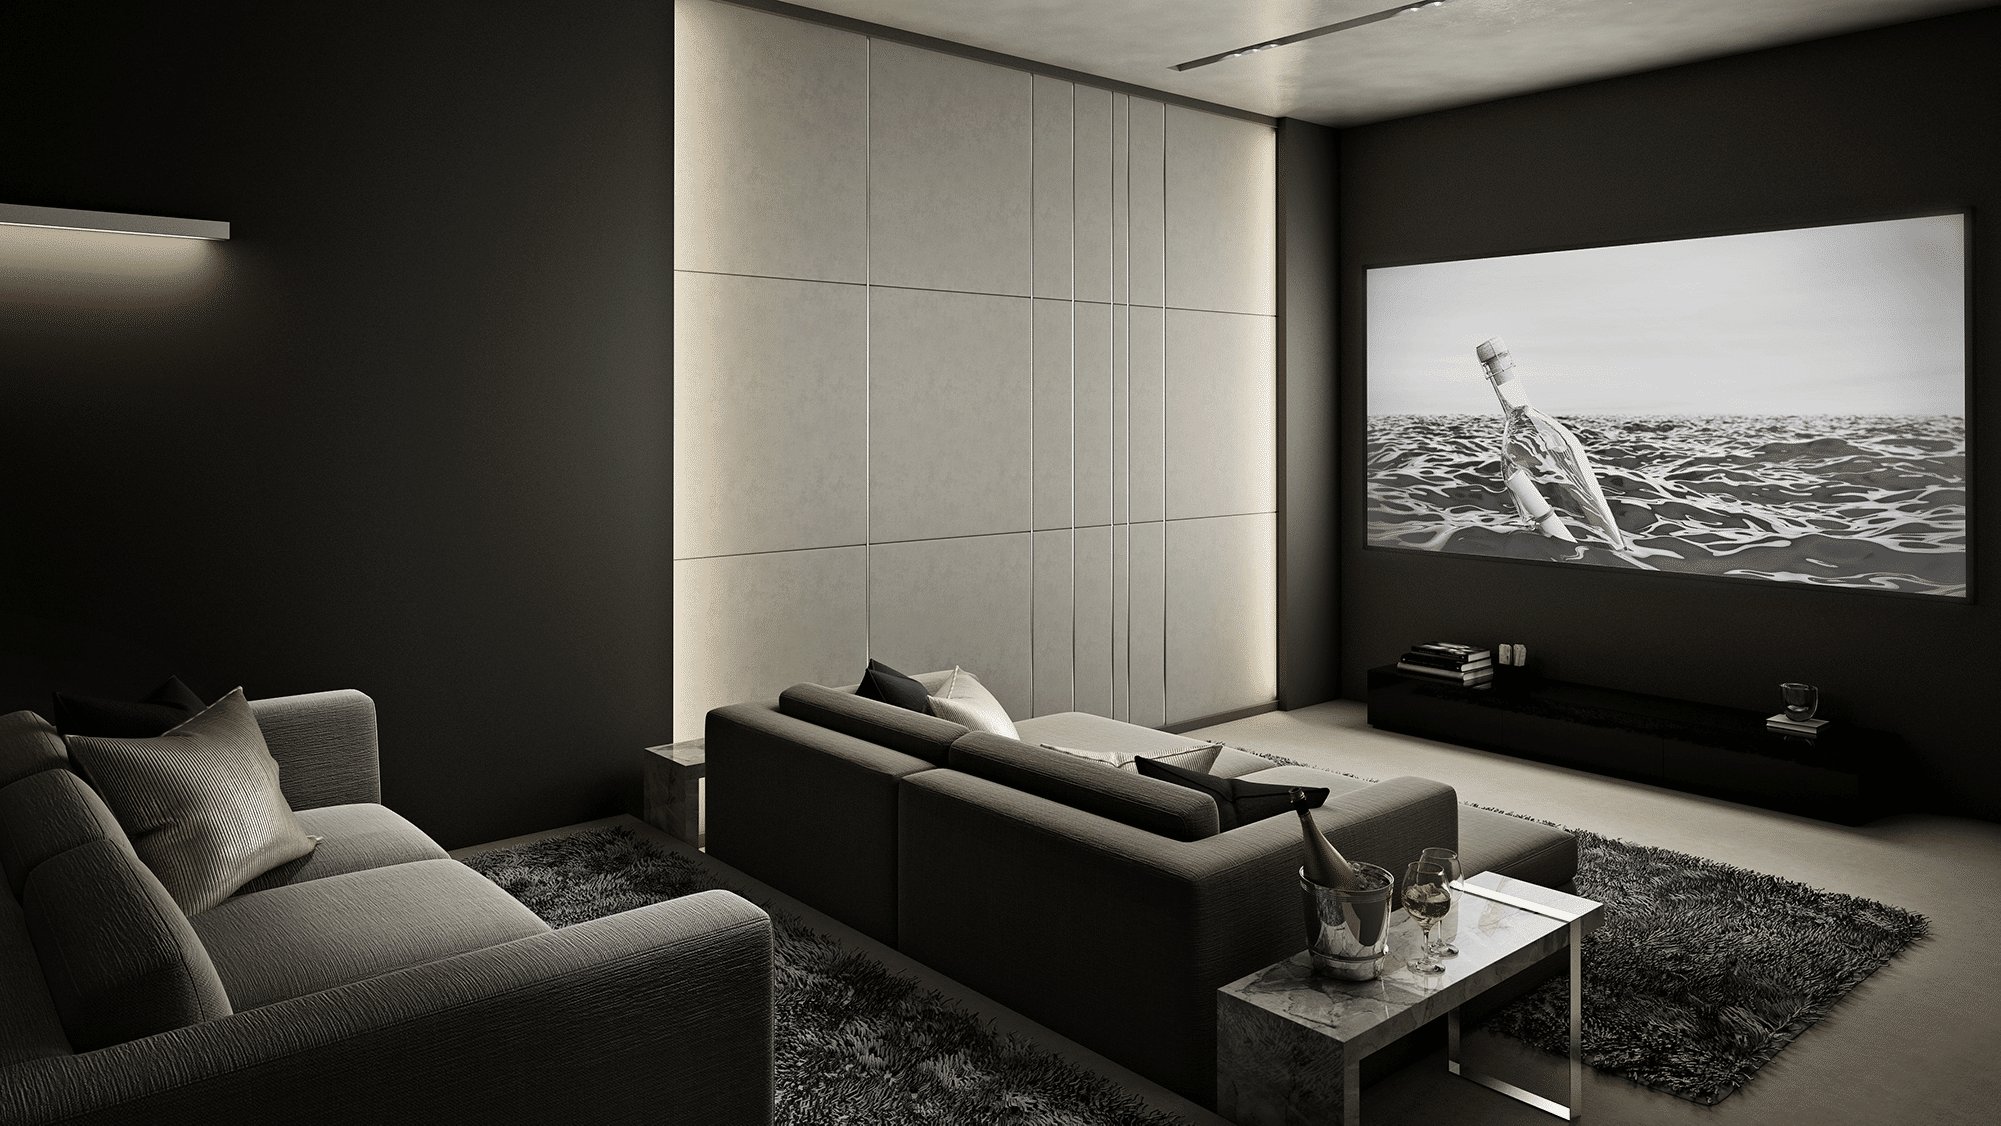 Home Cinema - Contemporary - Home Theater - Berkshire - by Adept